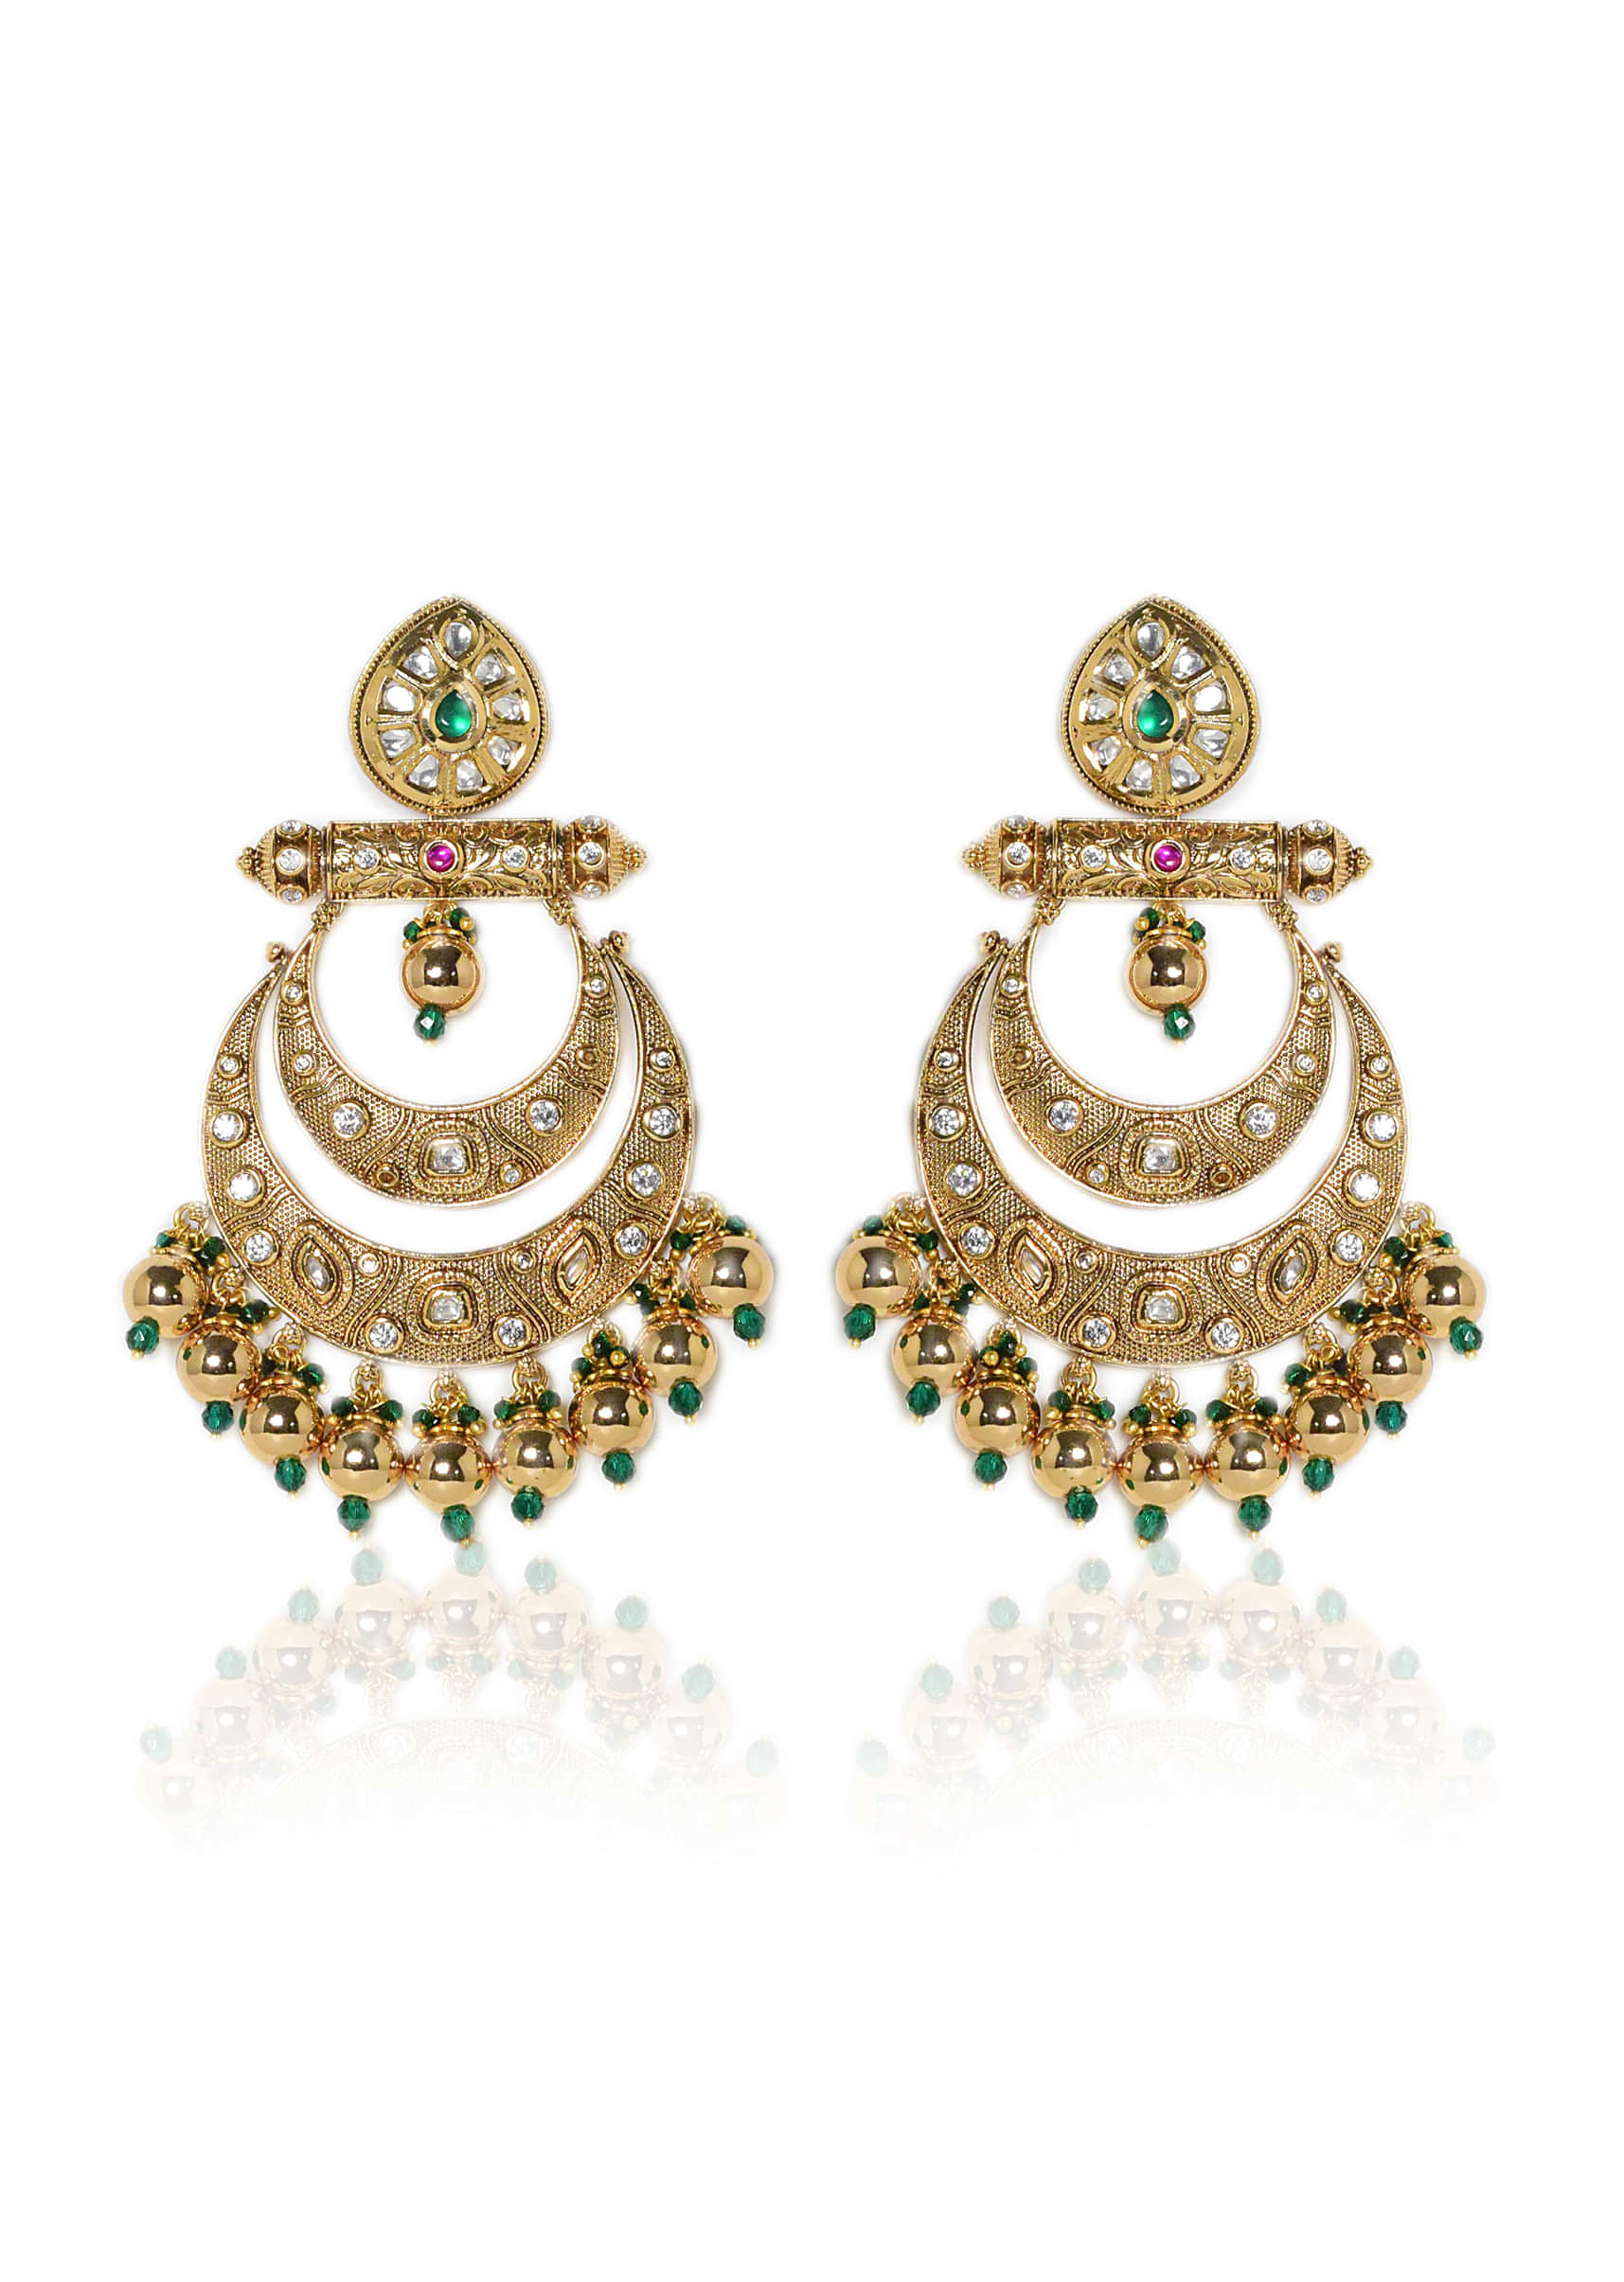 Gold Plated Chandbali Earrings Studded With Kundan And Synthetic Color Stones By Tizora